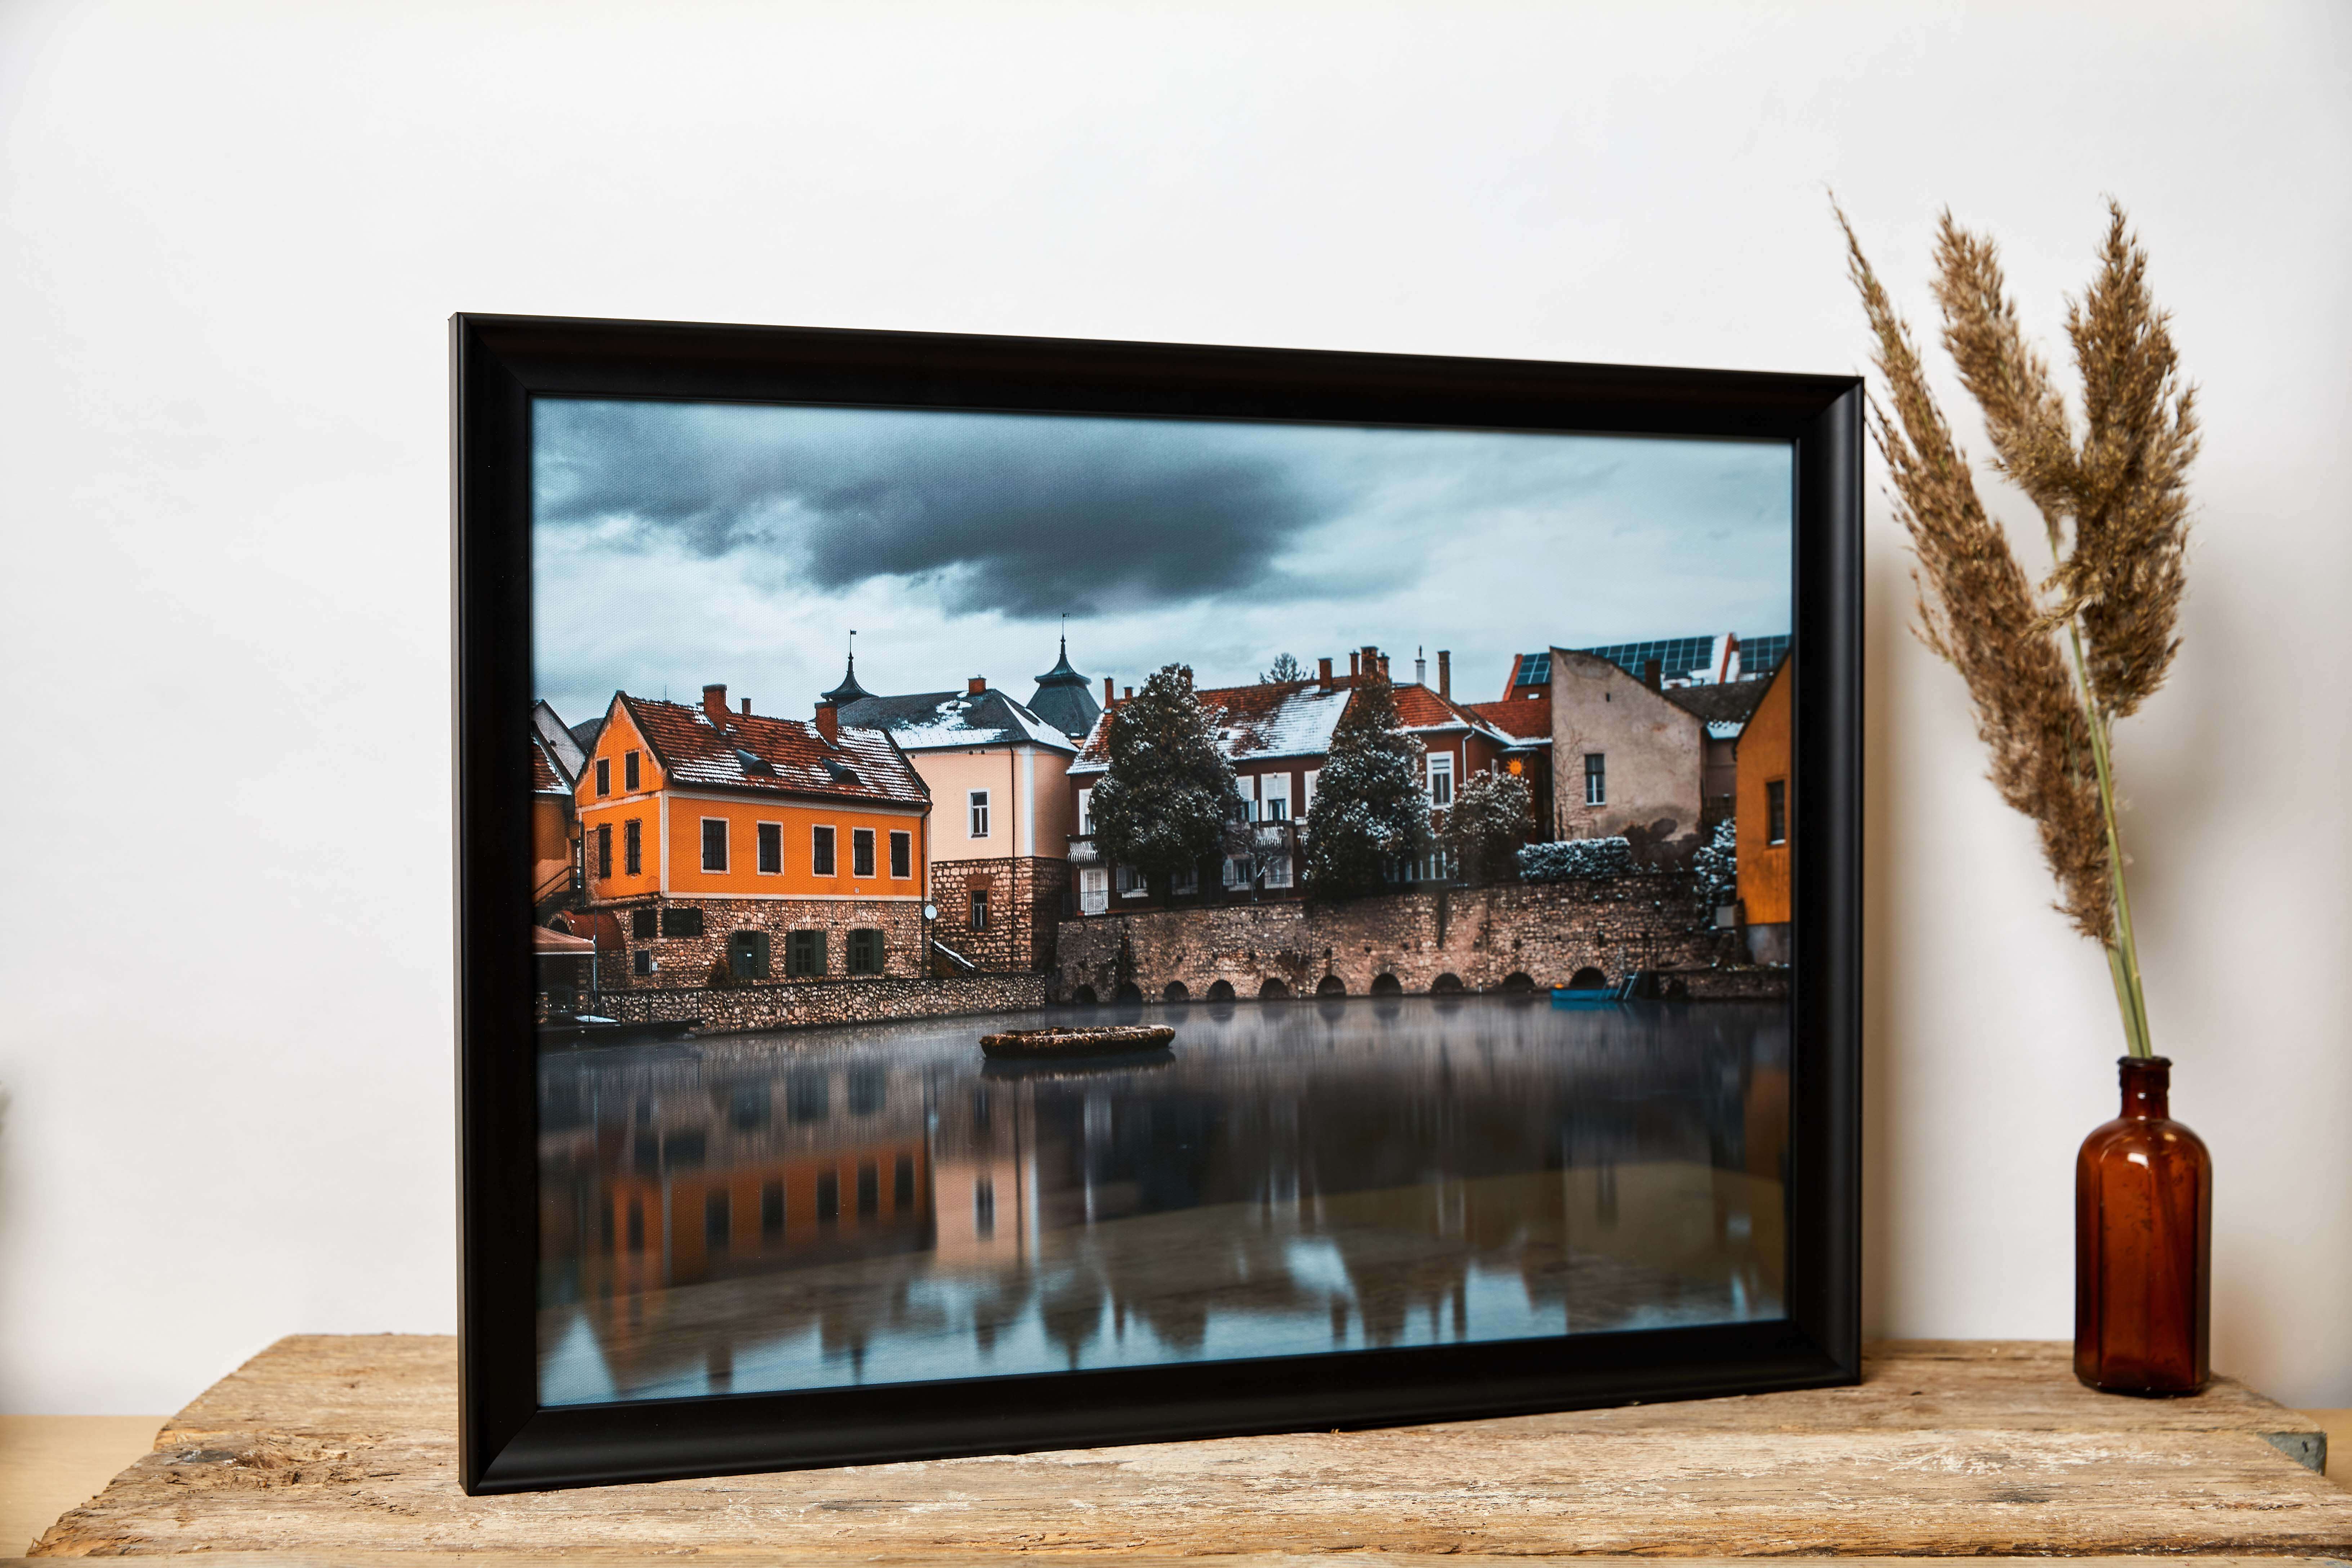 Custom framed print of UK photography that would look beautifuldisplayed on your wall, shelf or desk